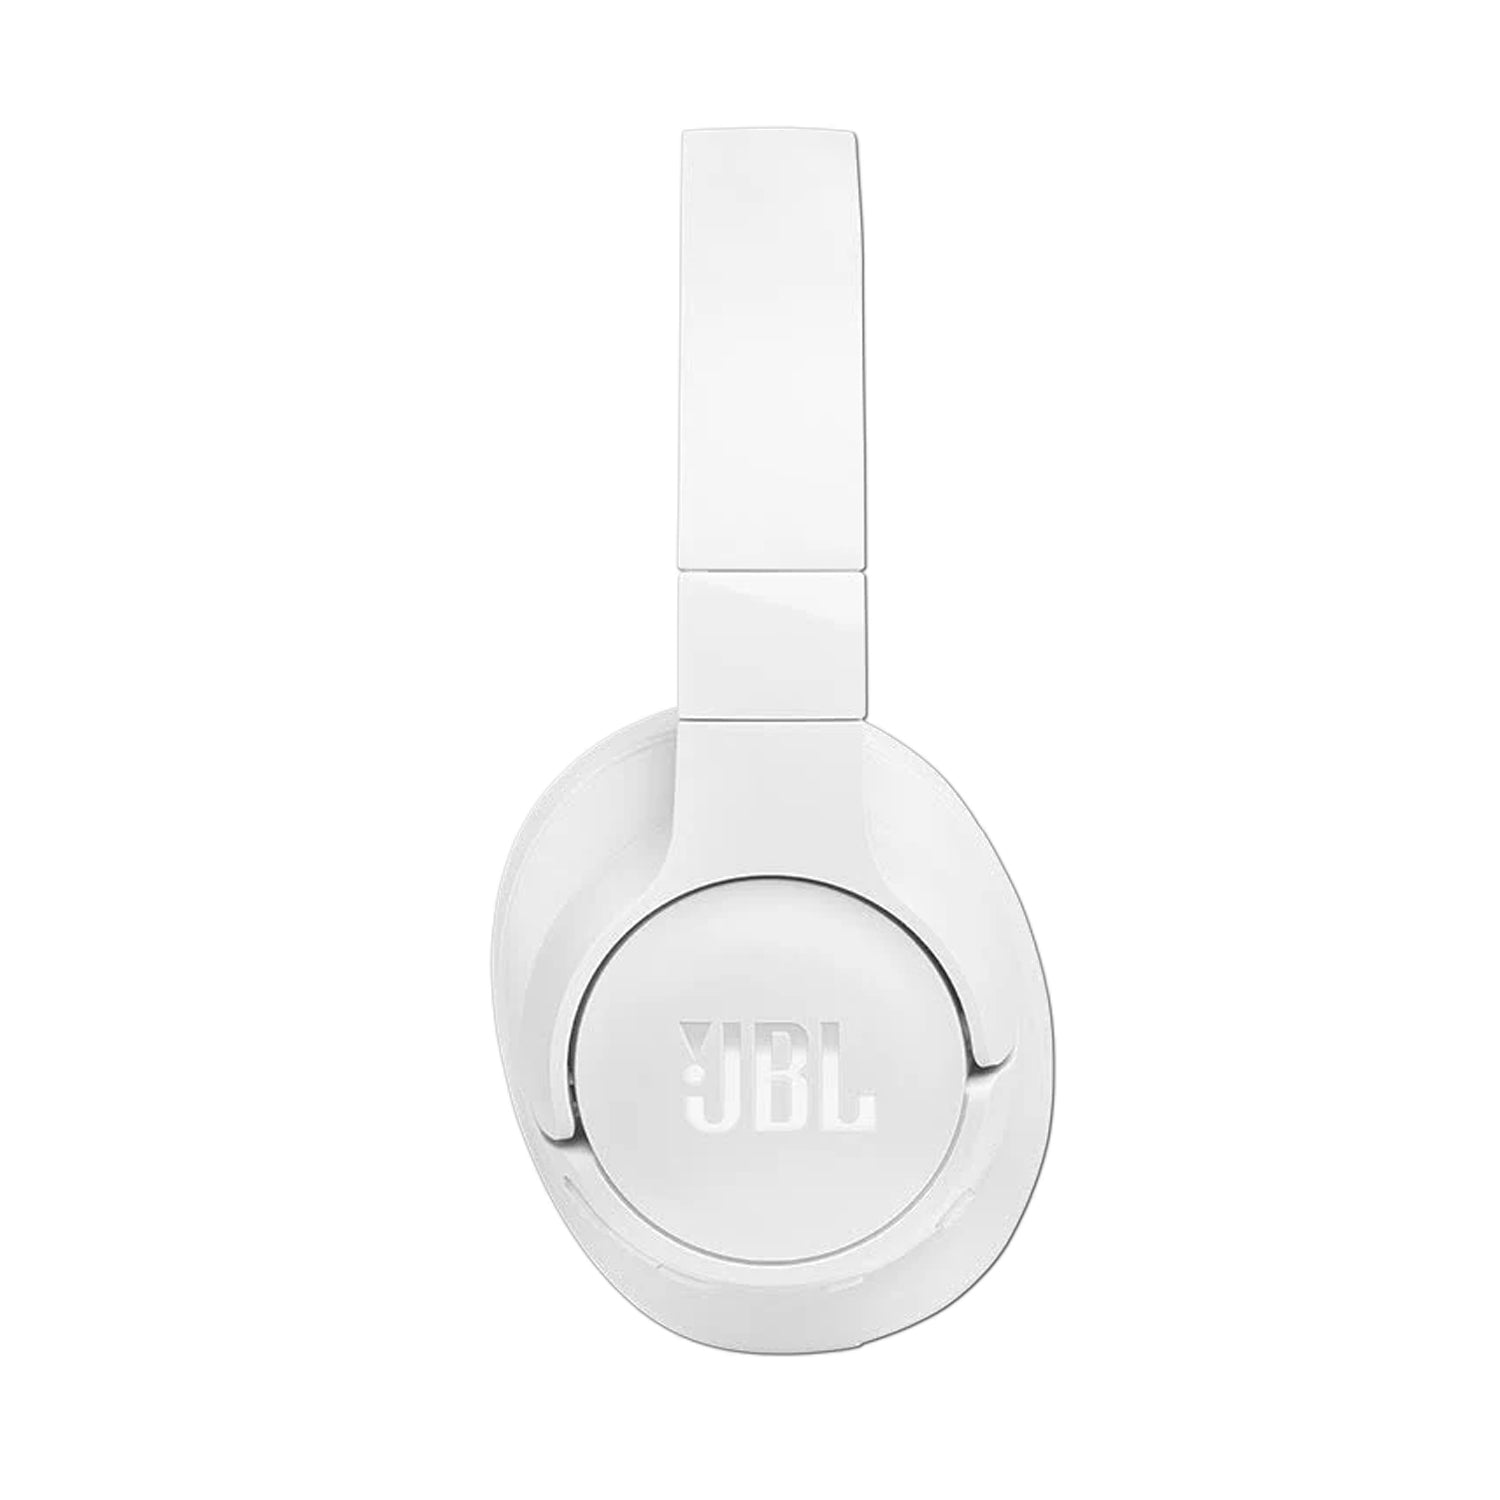 JBL Tune 770NC Adaptive Noise Cancelling Wireless Over-Ear Headphones, Pure  Bass Sound, Smart Ambient, Bluetooth 5.3, Le Audio, VoiceAware, 70H  Battery, Multi-Point Connect - Purple, JBLT770NCPUR: Buy Online at Best  Price in